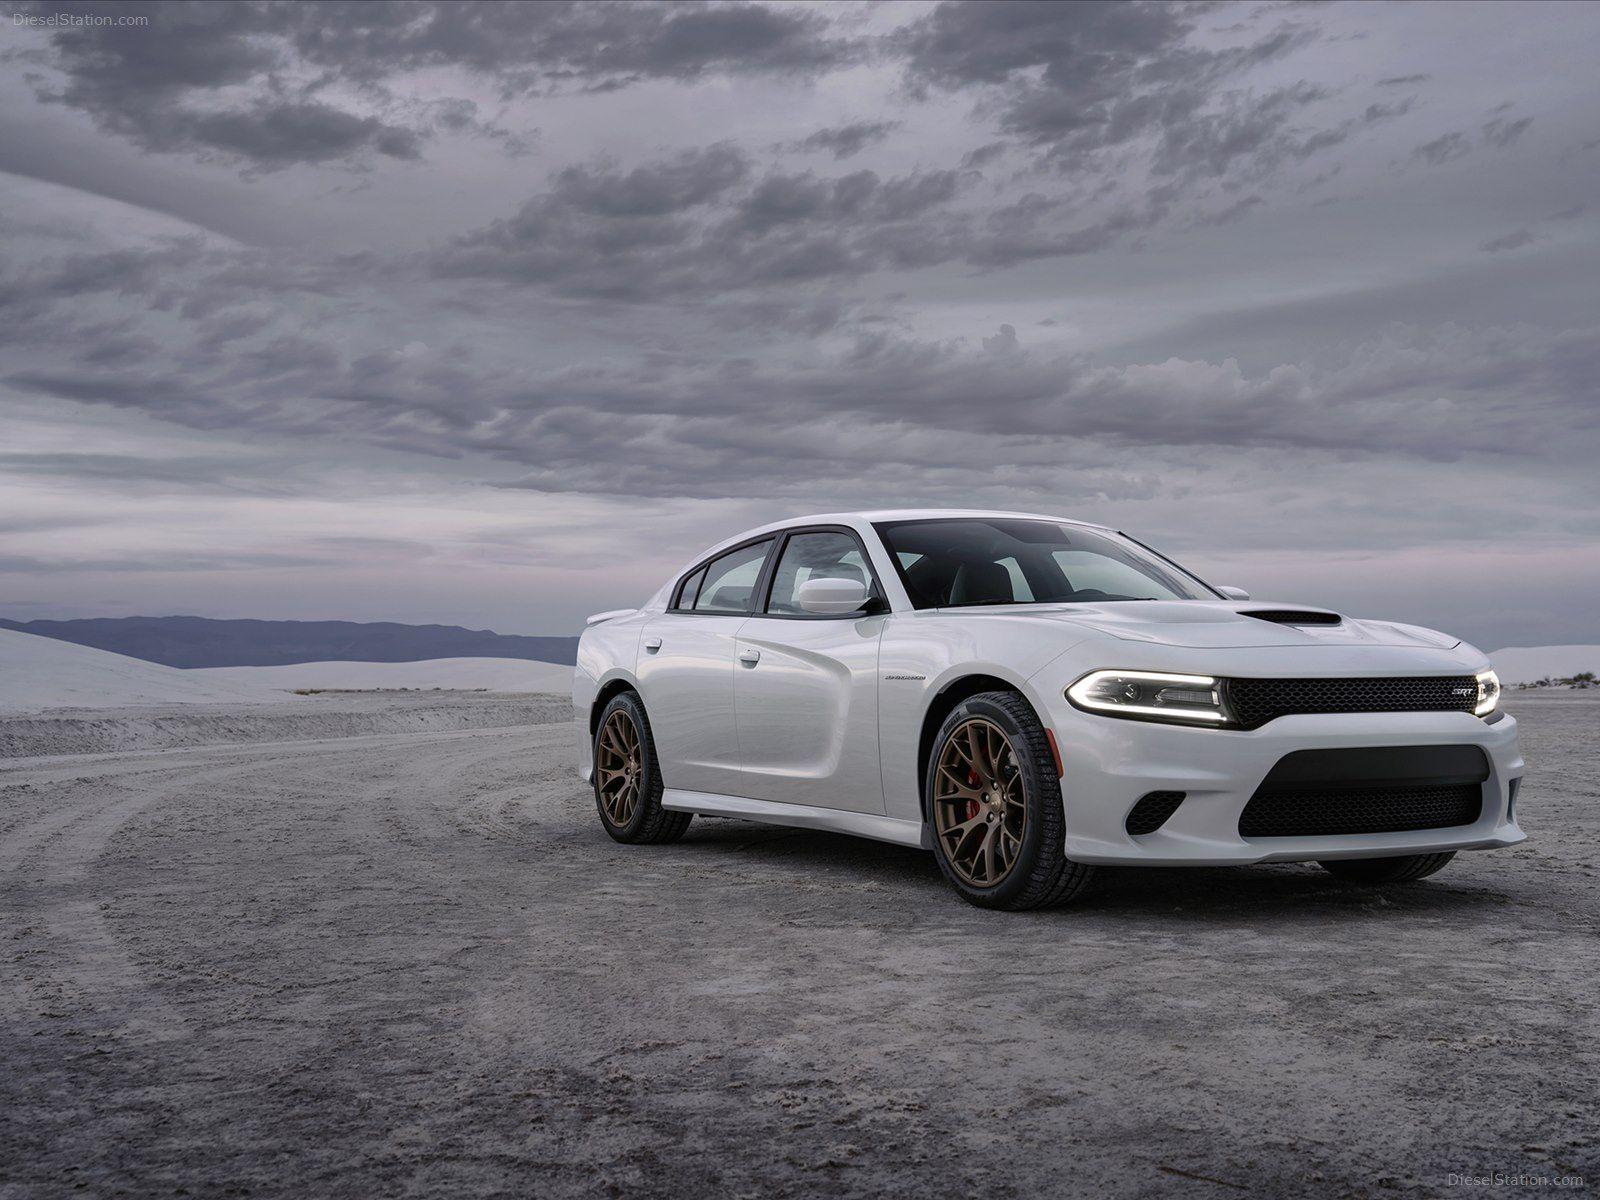 2019 Dodge Charger SRT Hellcat Octane Edition Wallpaper and Image Gallery